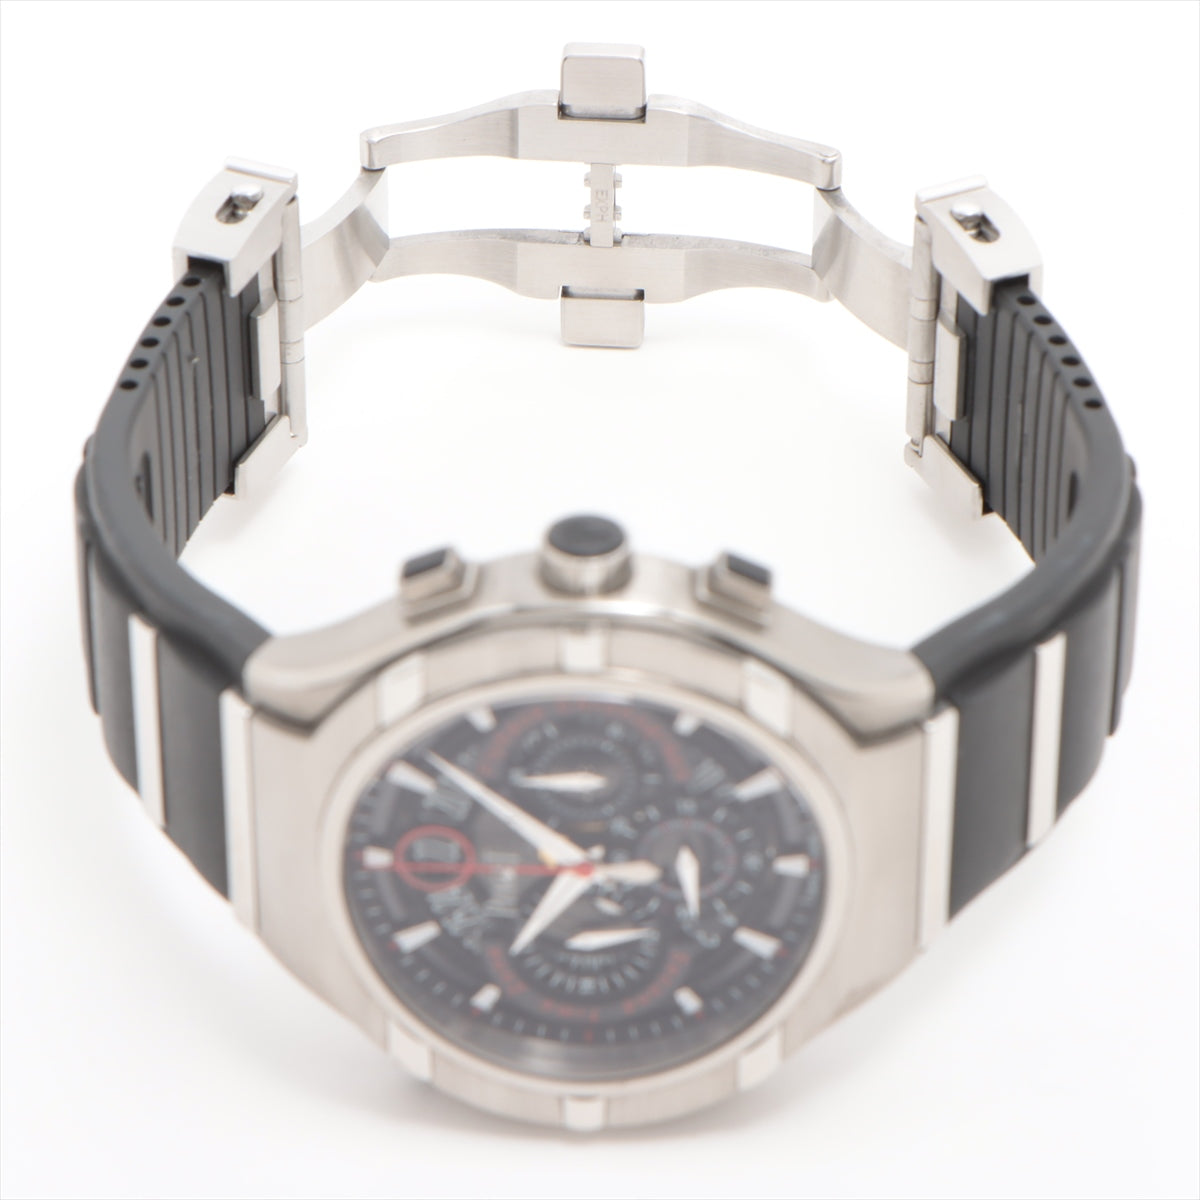 Piaget Polo 45 Flyback chronograph GOA35001 SS & Rubber AT Black-Face Limited to 500 books in the world